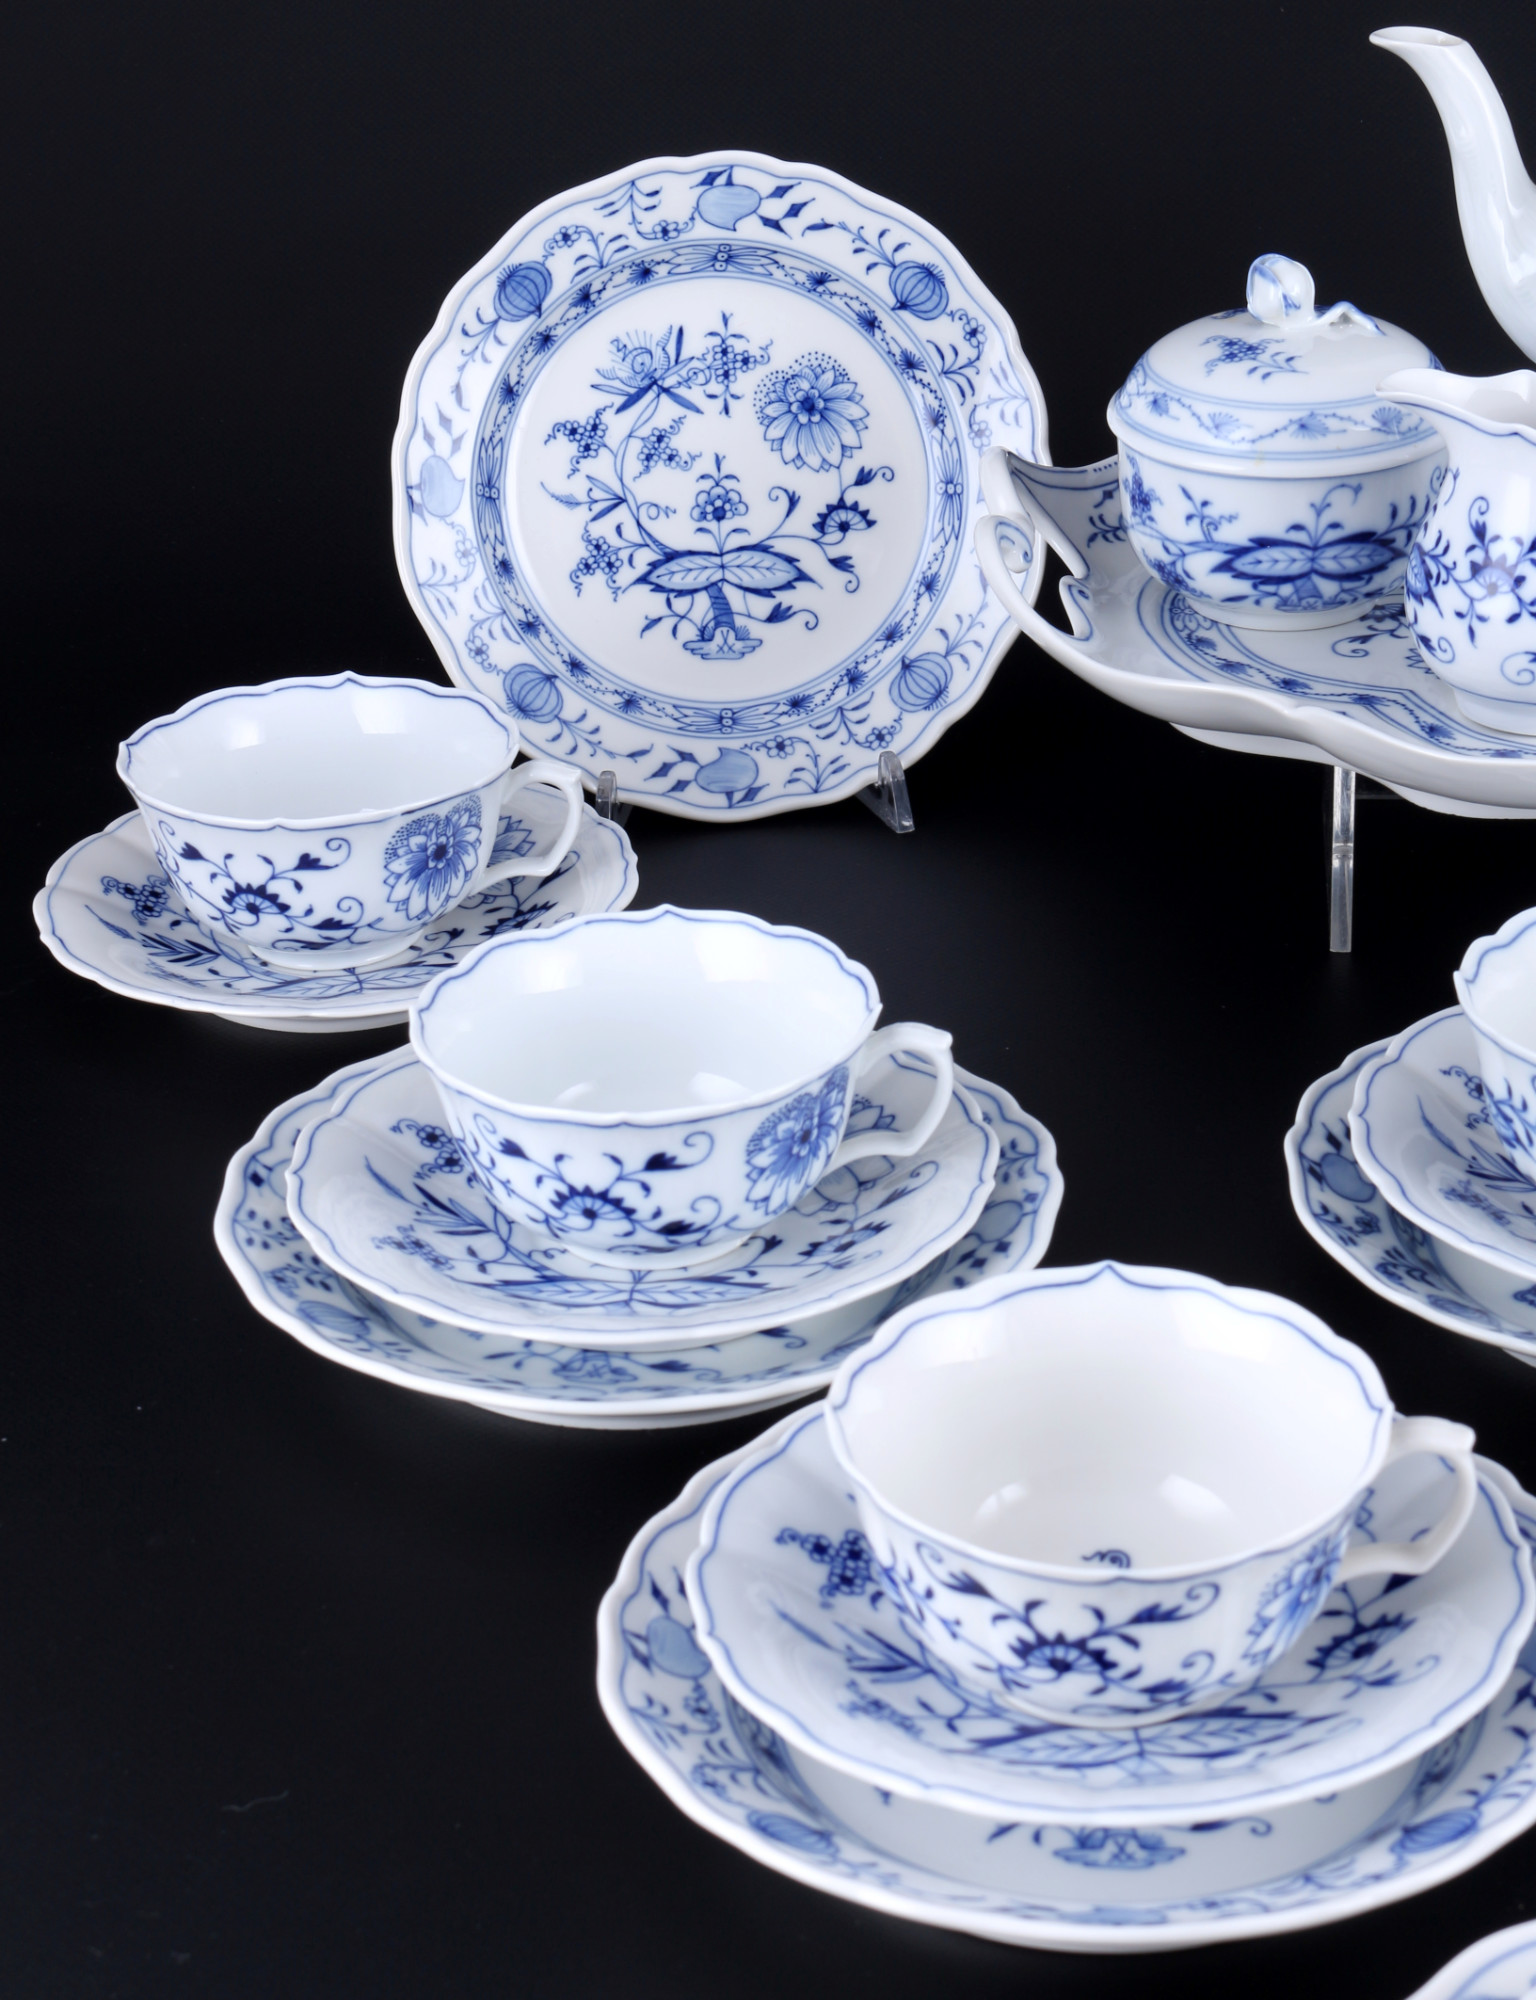 Meissen Onion Pattern tea service for 8 persons 1st choice, Teeservice für 8 Personen 1.Wahl, - Image 3 of 6